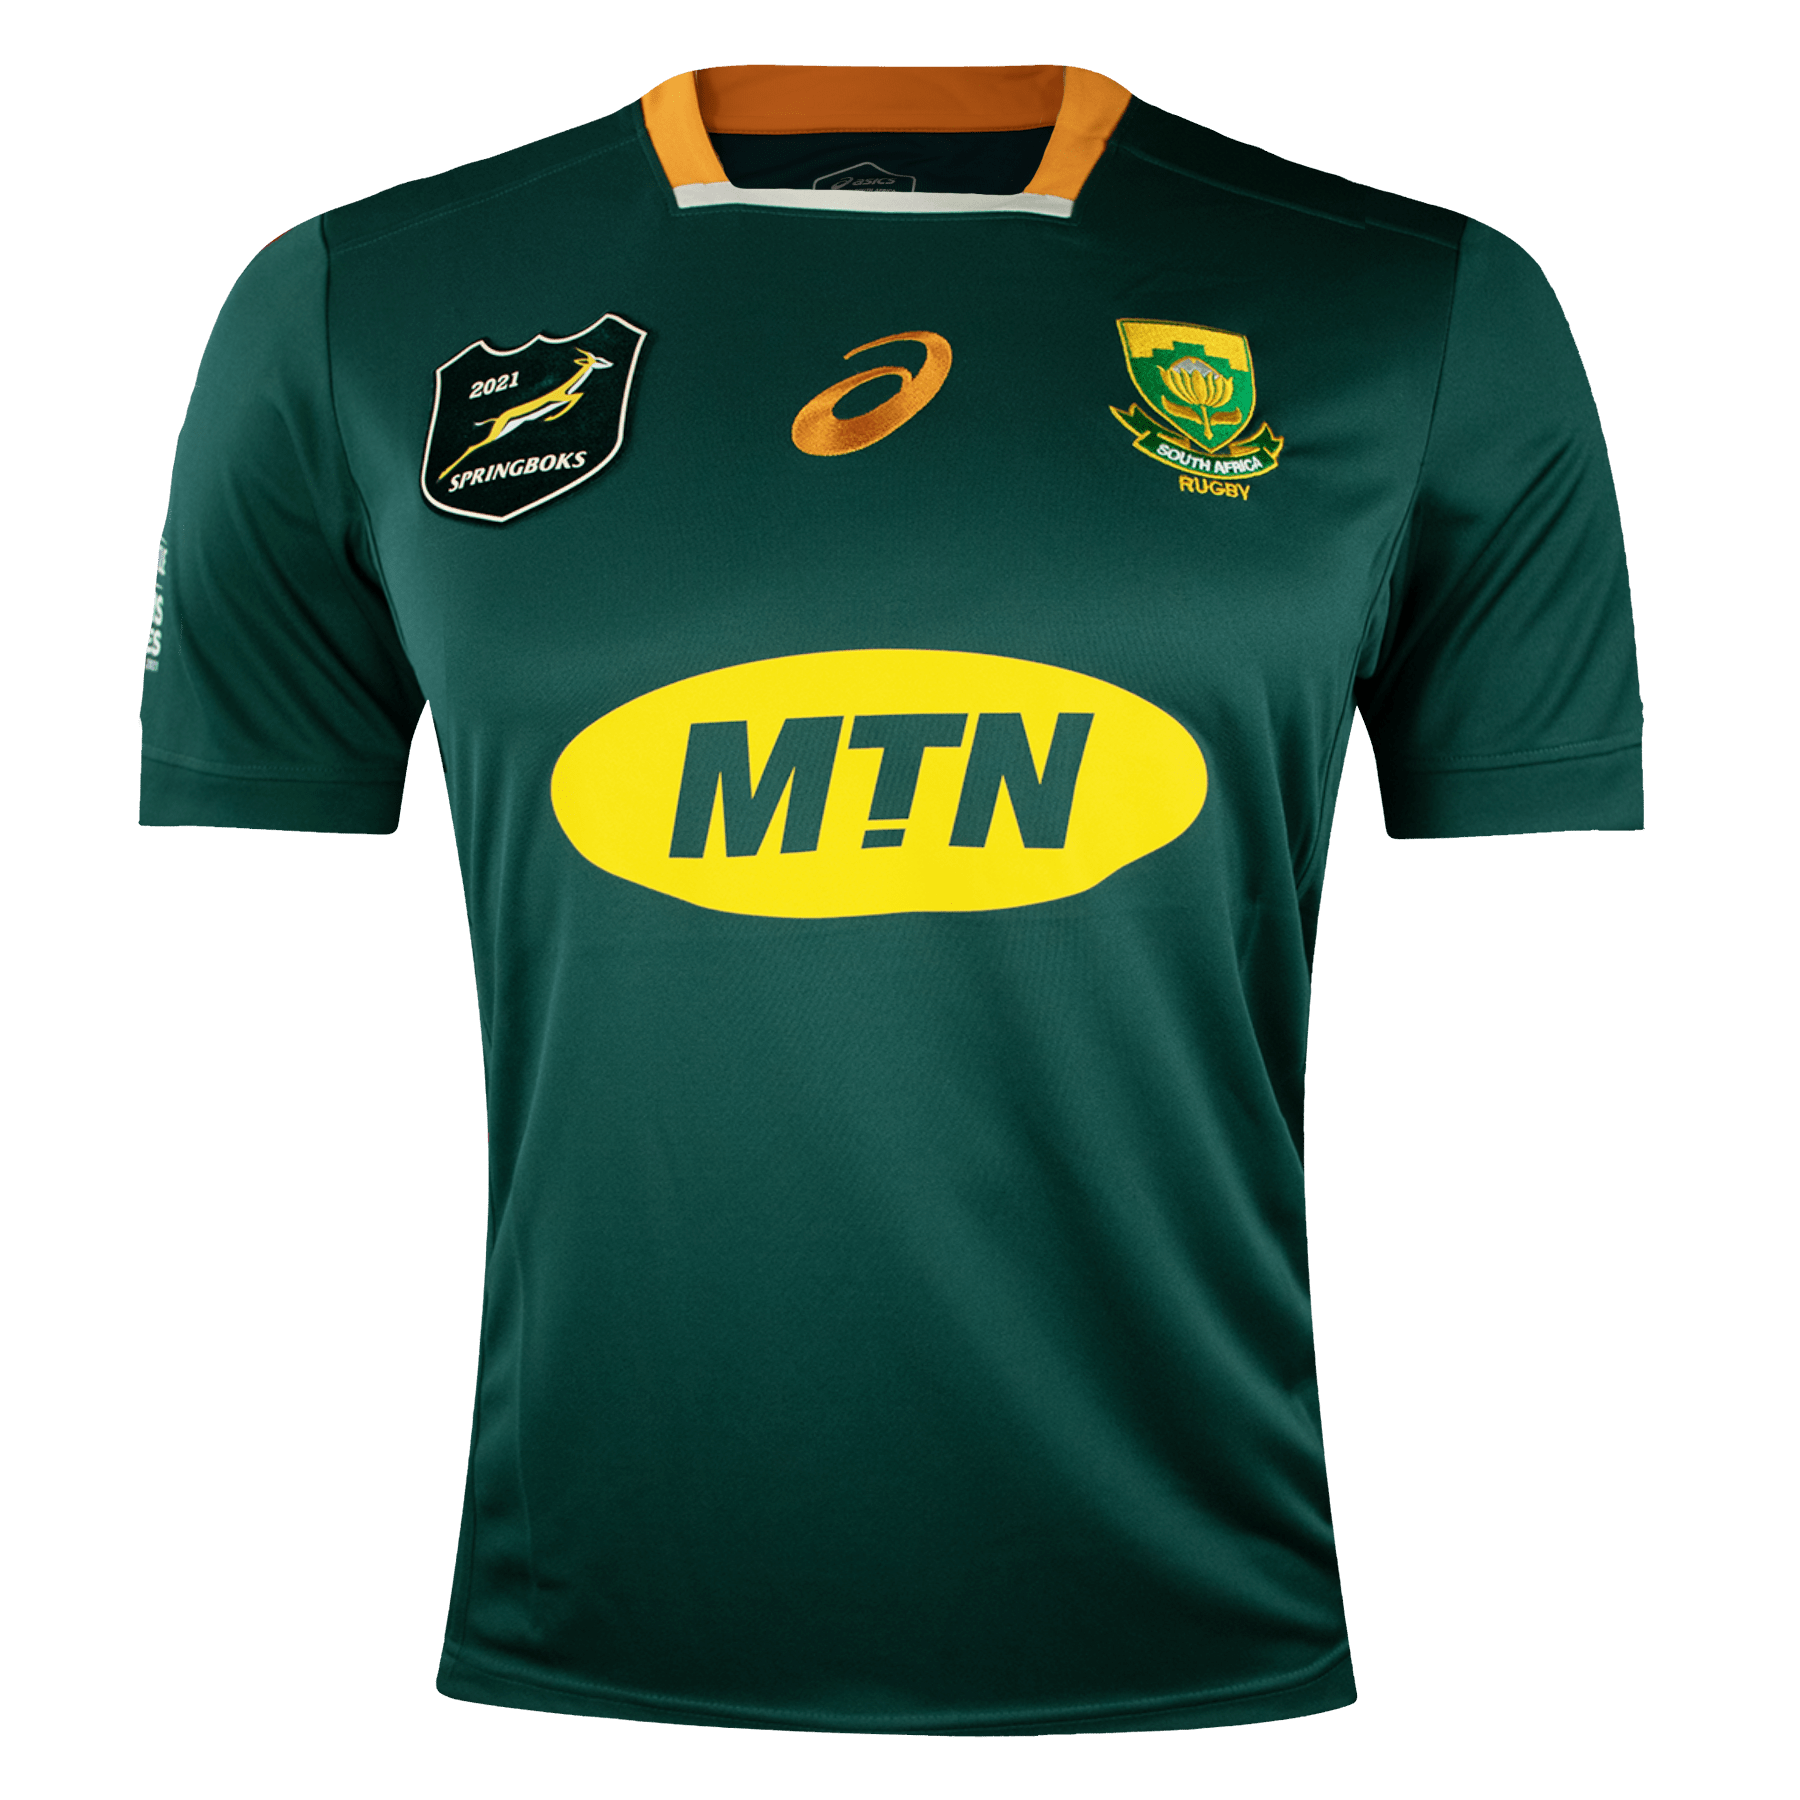 South Africa Springboks Lions Series Rugby Jersey 2021 by Asics l World Rugby Shop